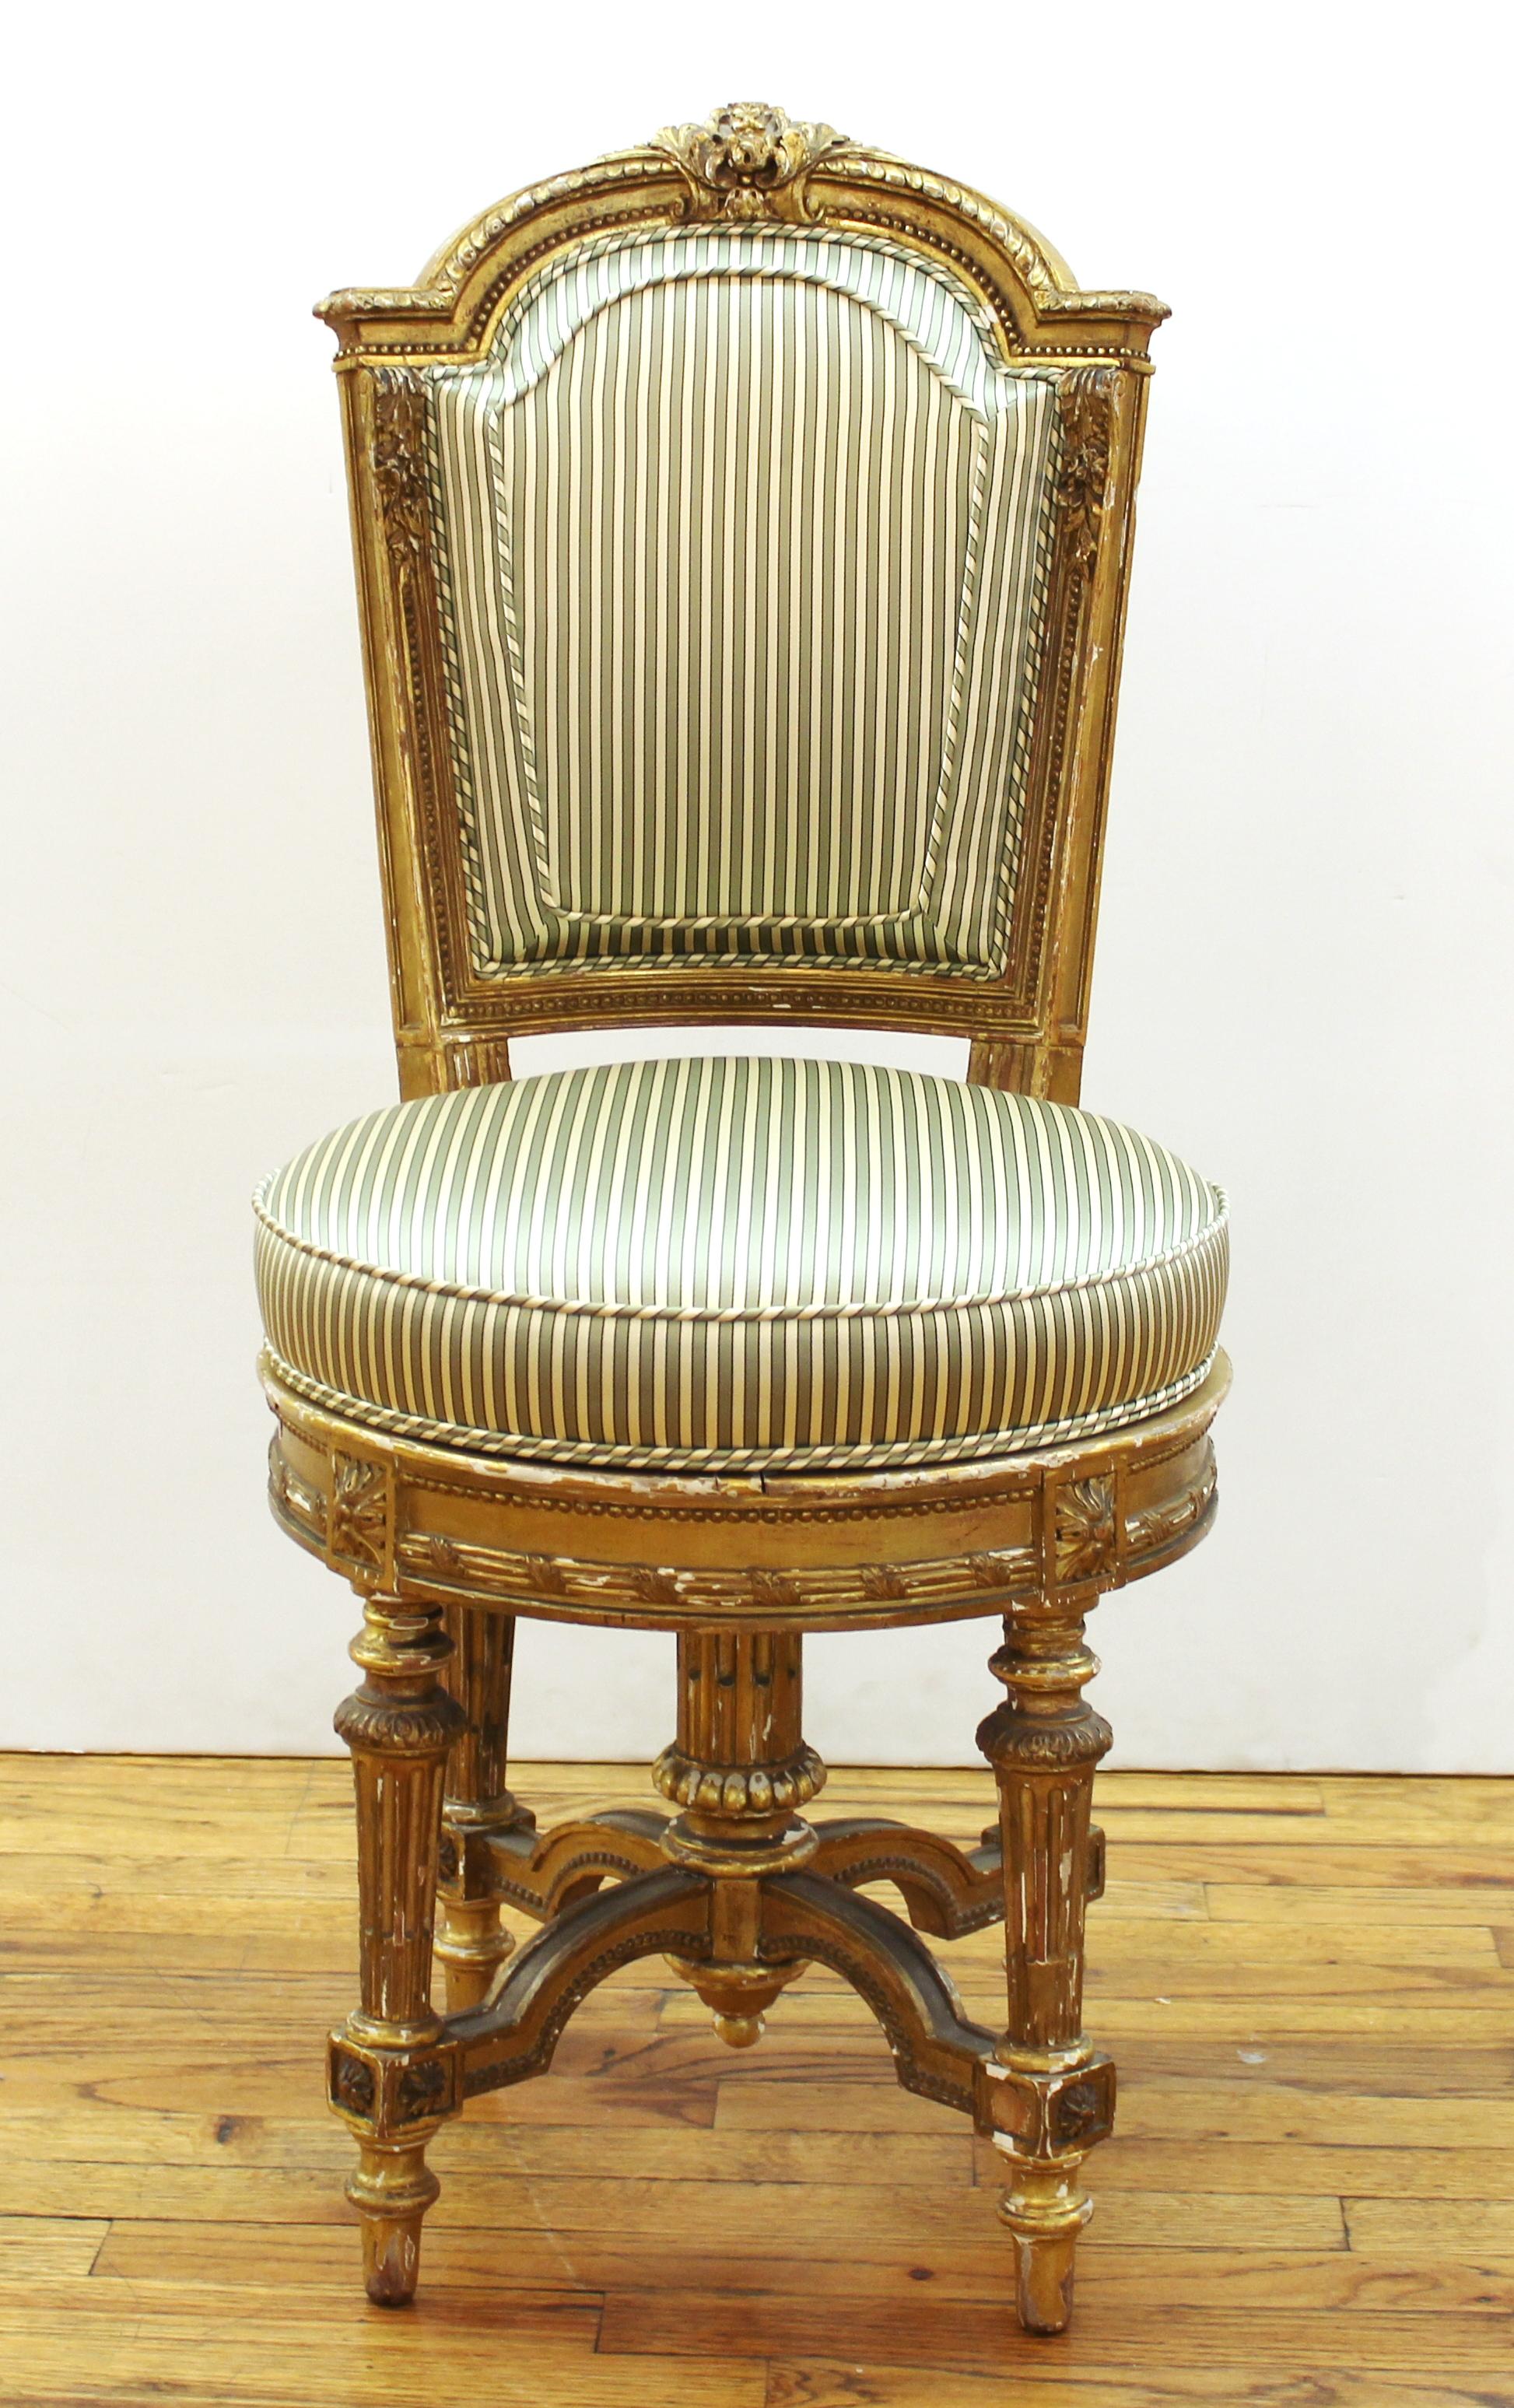 French Marie-Antoinette style giltwood boudoir chair with upholstered swiveling seat and back. Late 19th century. Measures: 36.5